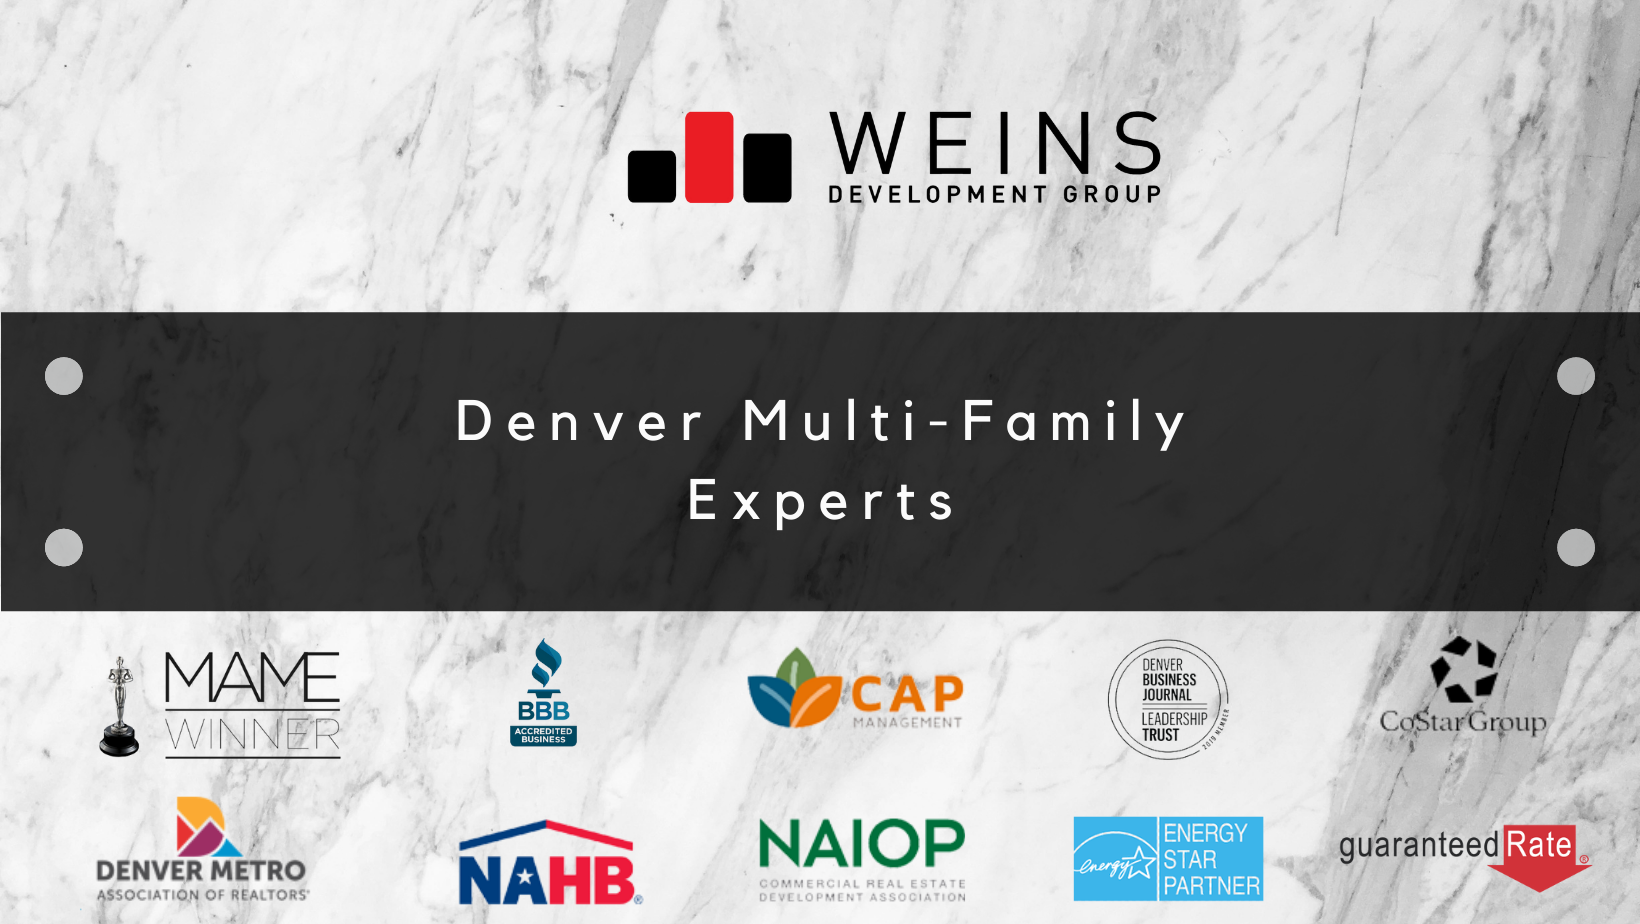 The Next Big Thing in Denver Real Estate: Weins Development Group